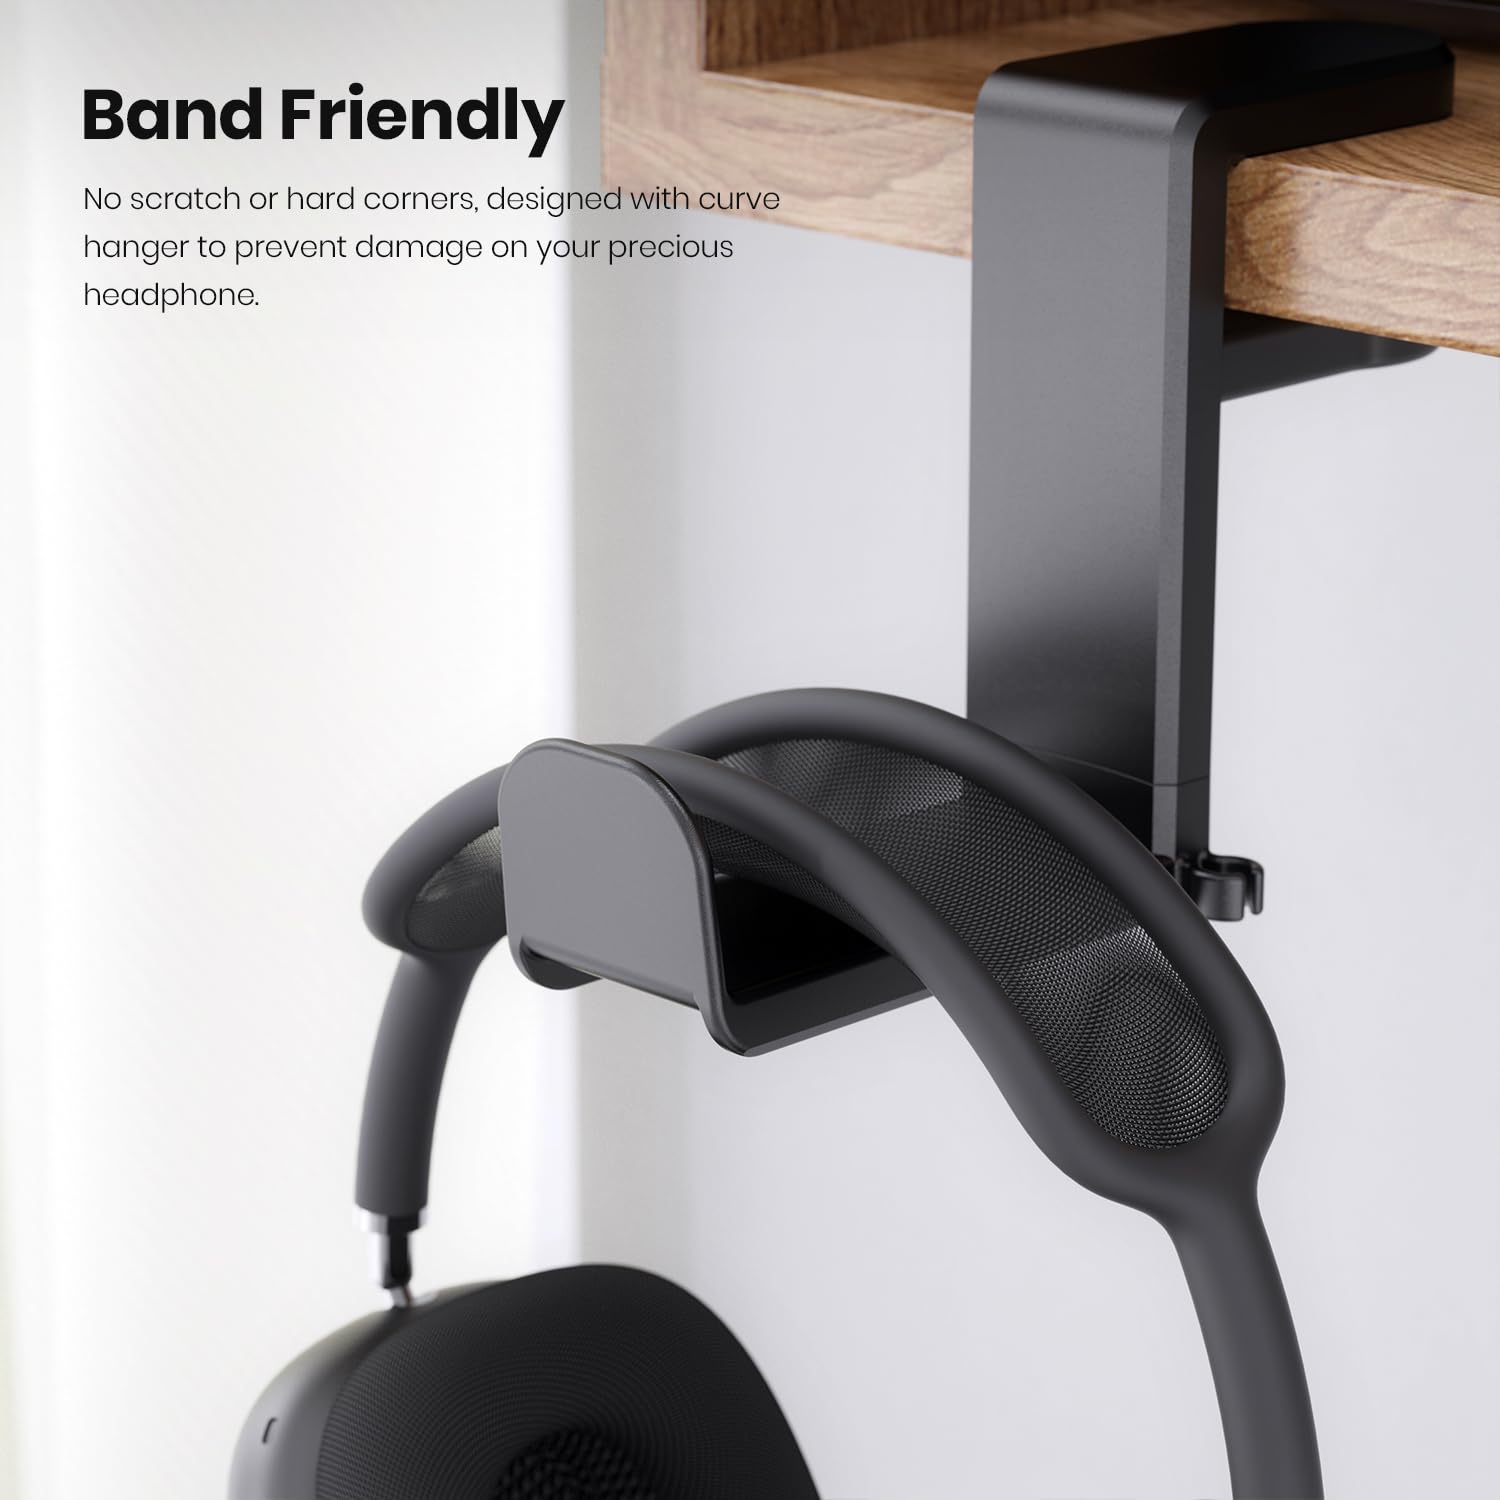 PC Gaming Headset Headphone Hook Holder Hanger Mount, Headphones Stand with Adjustable & Rotating Arm Clamp, Under Desk Design, Universal Fit, Built in Cable Clip Organizer EURPMASK